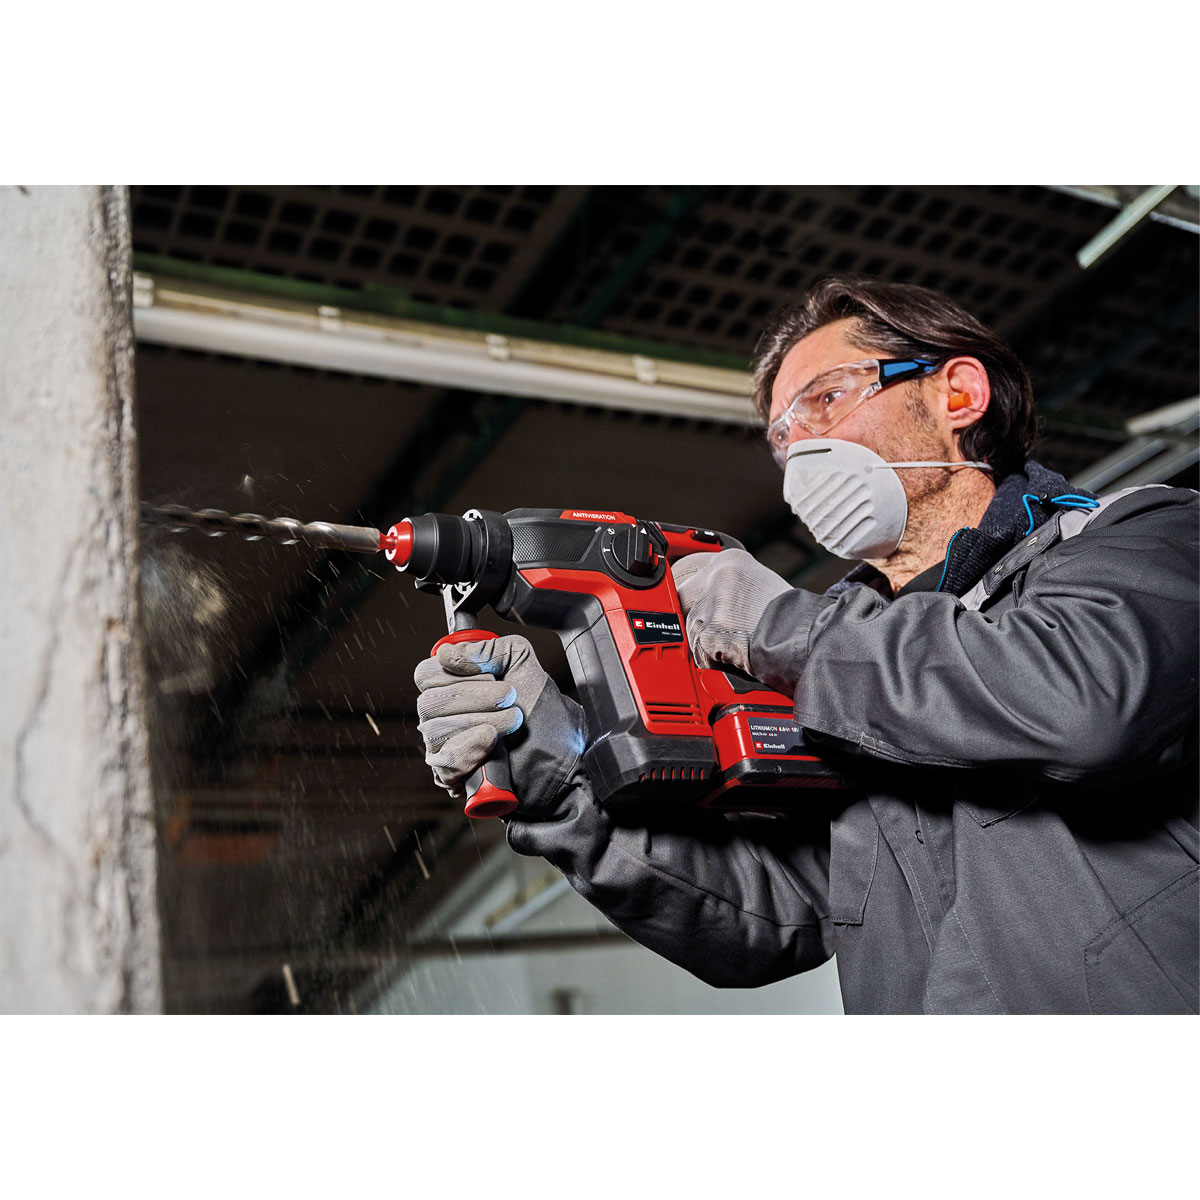 Einhell Herocco Bl Solo Battery Powered Rotary Hammer - Einhell